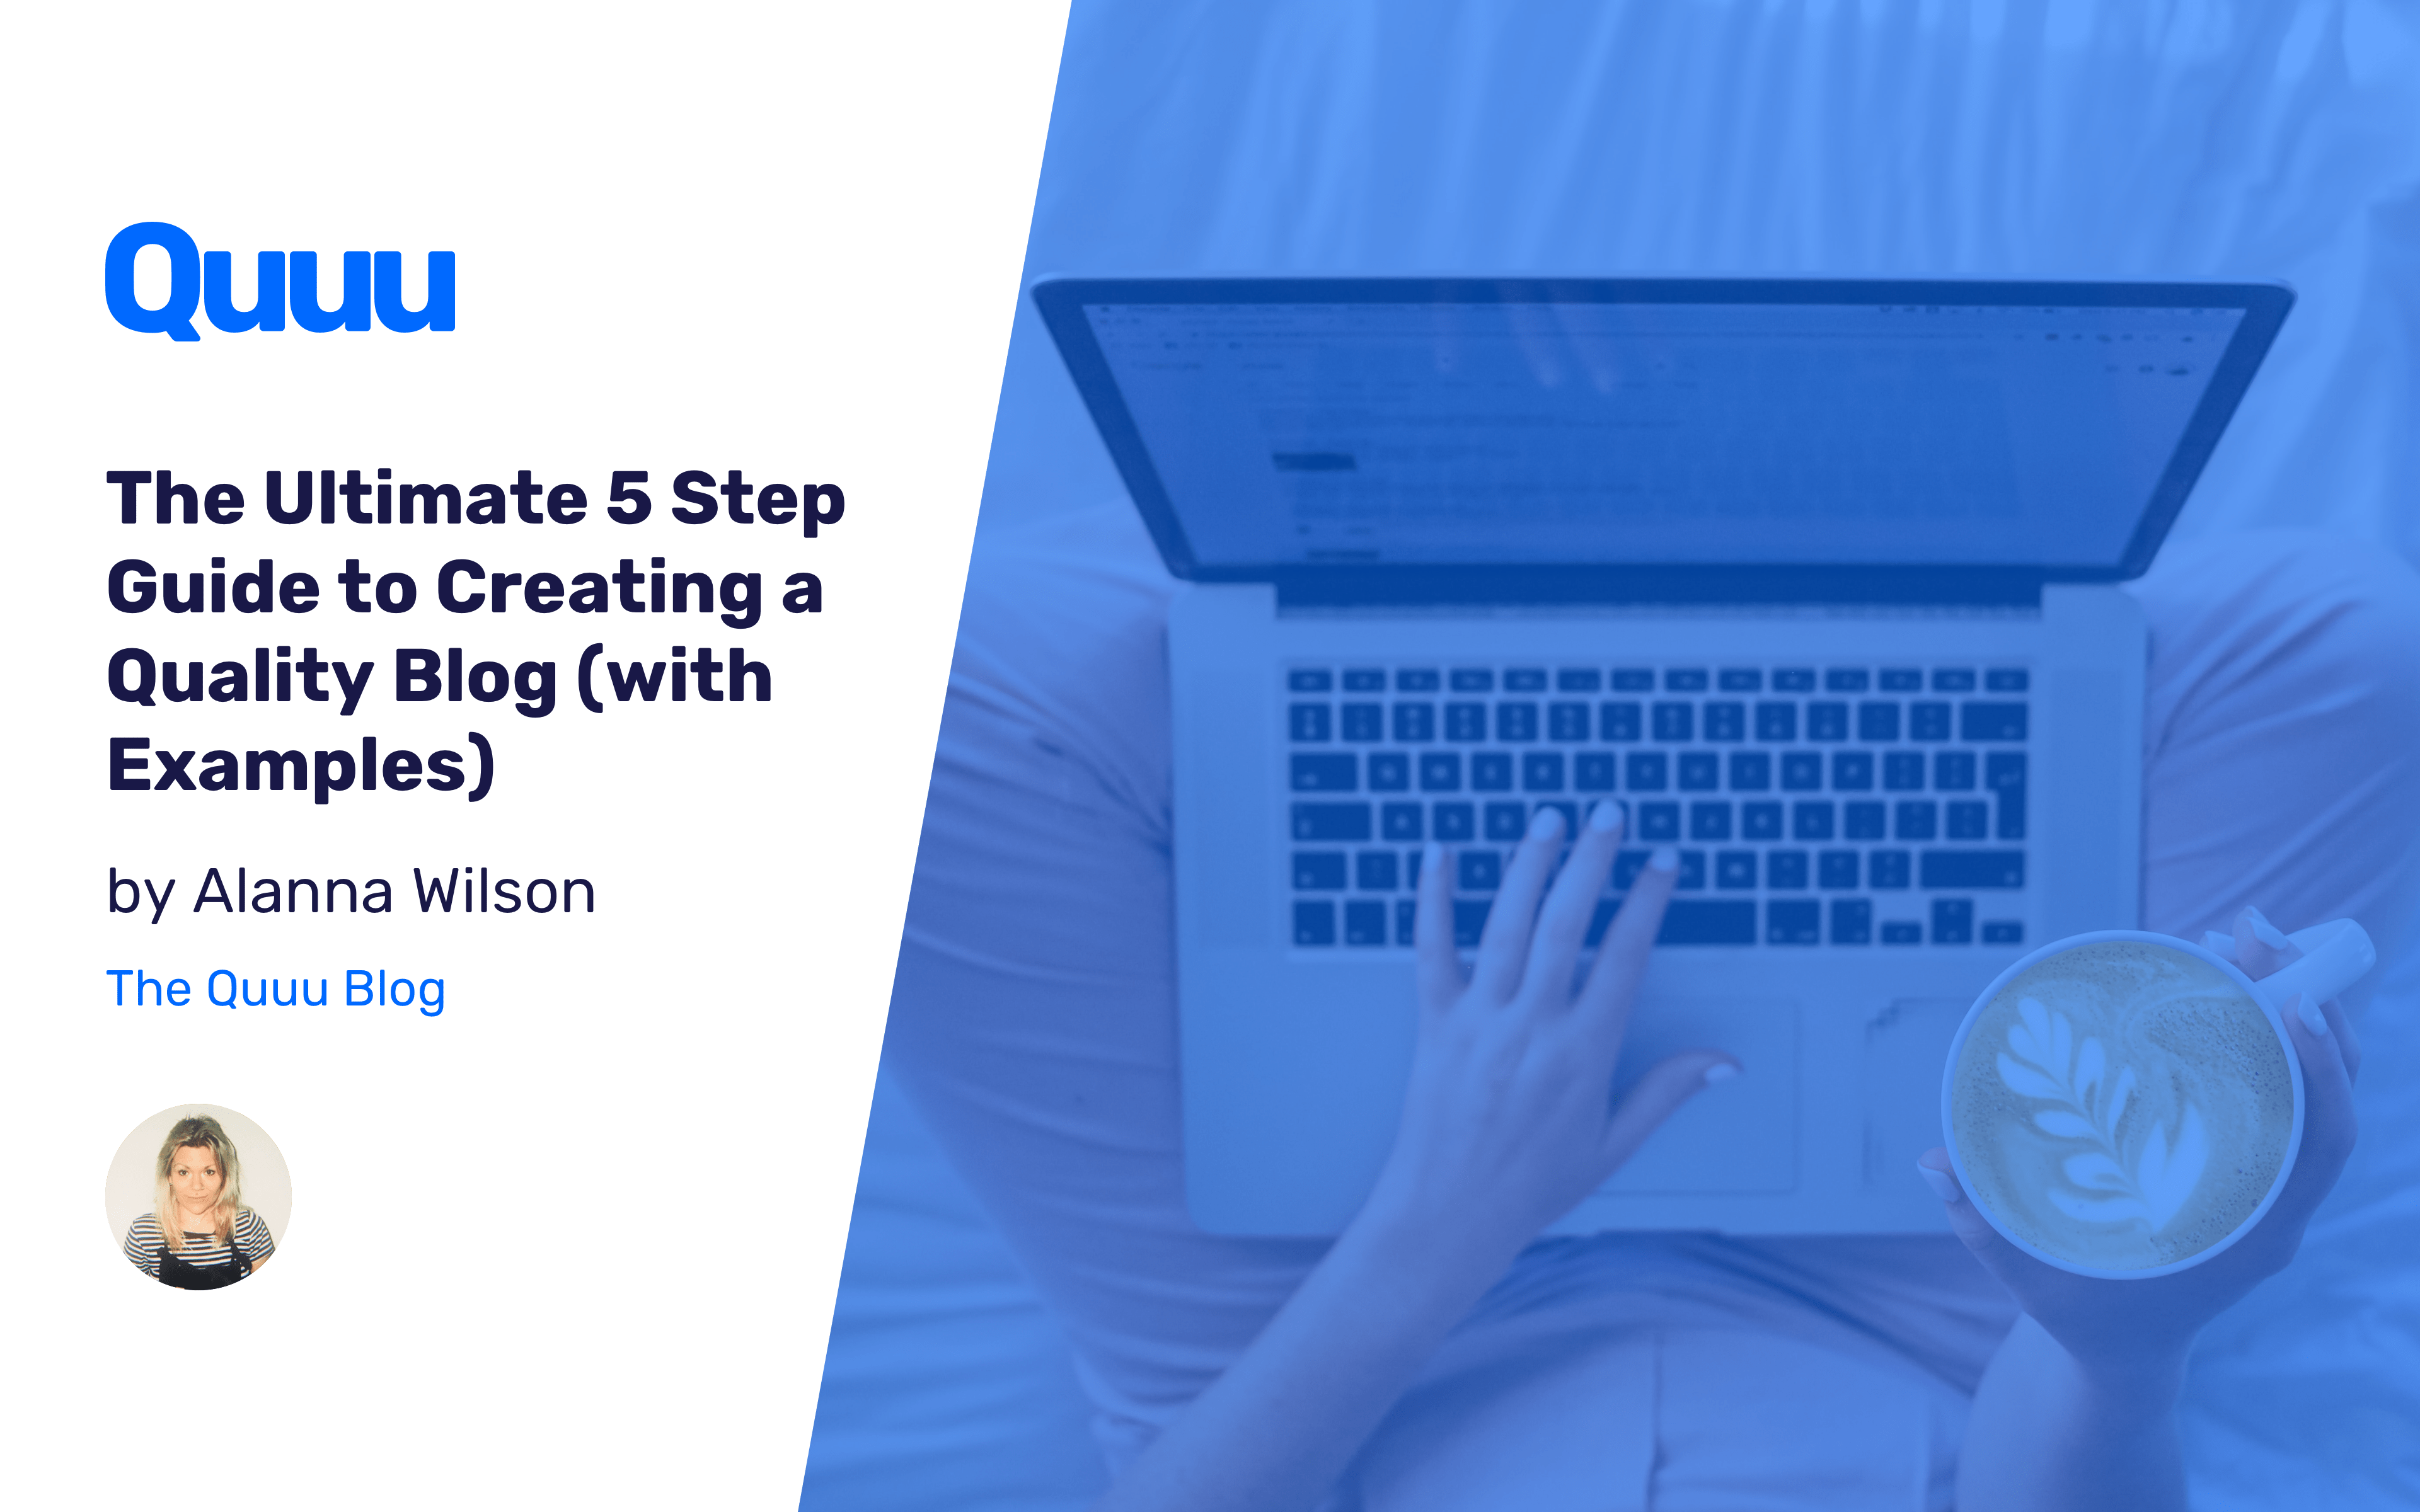 The Ultimate 5 Step Guide to Creating a Quality Blog (with Examples and Checklist)